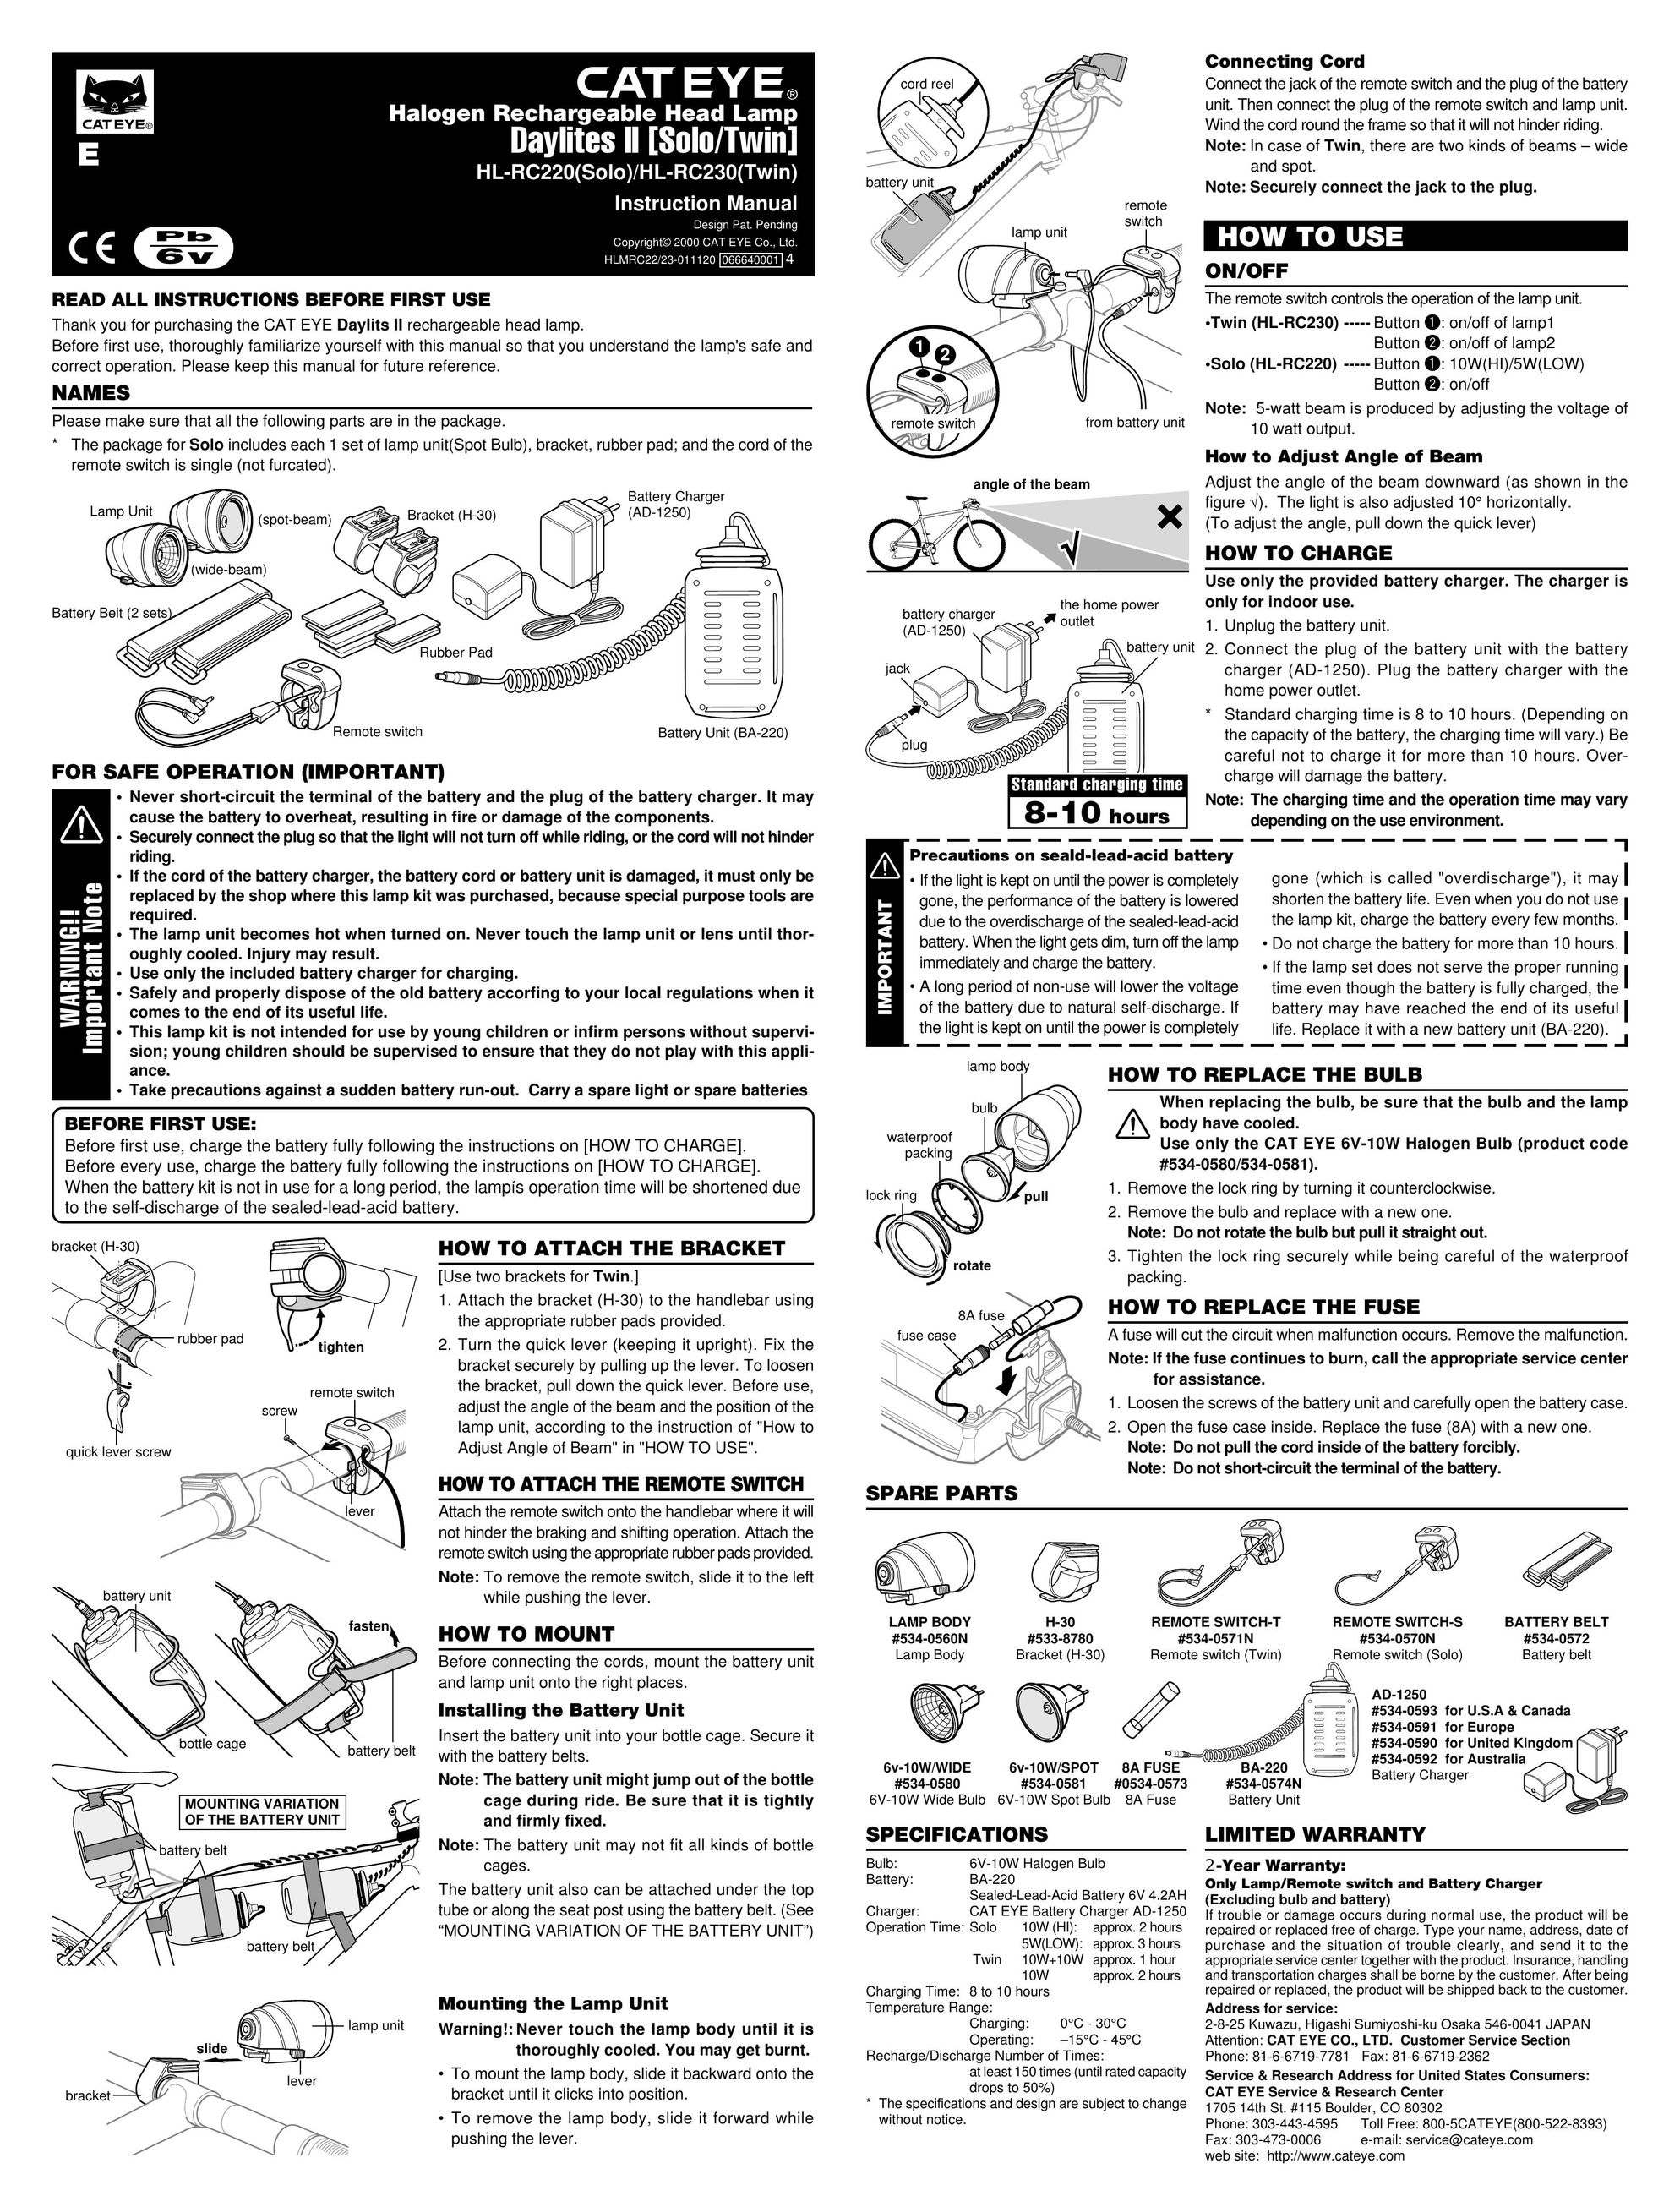 Cateye HL-RC230 Bicycle Accessories User Manual